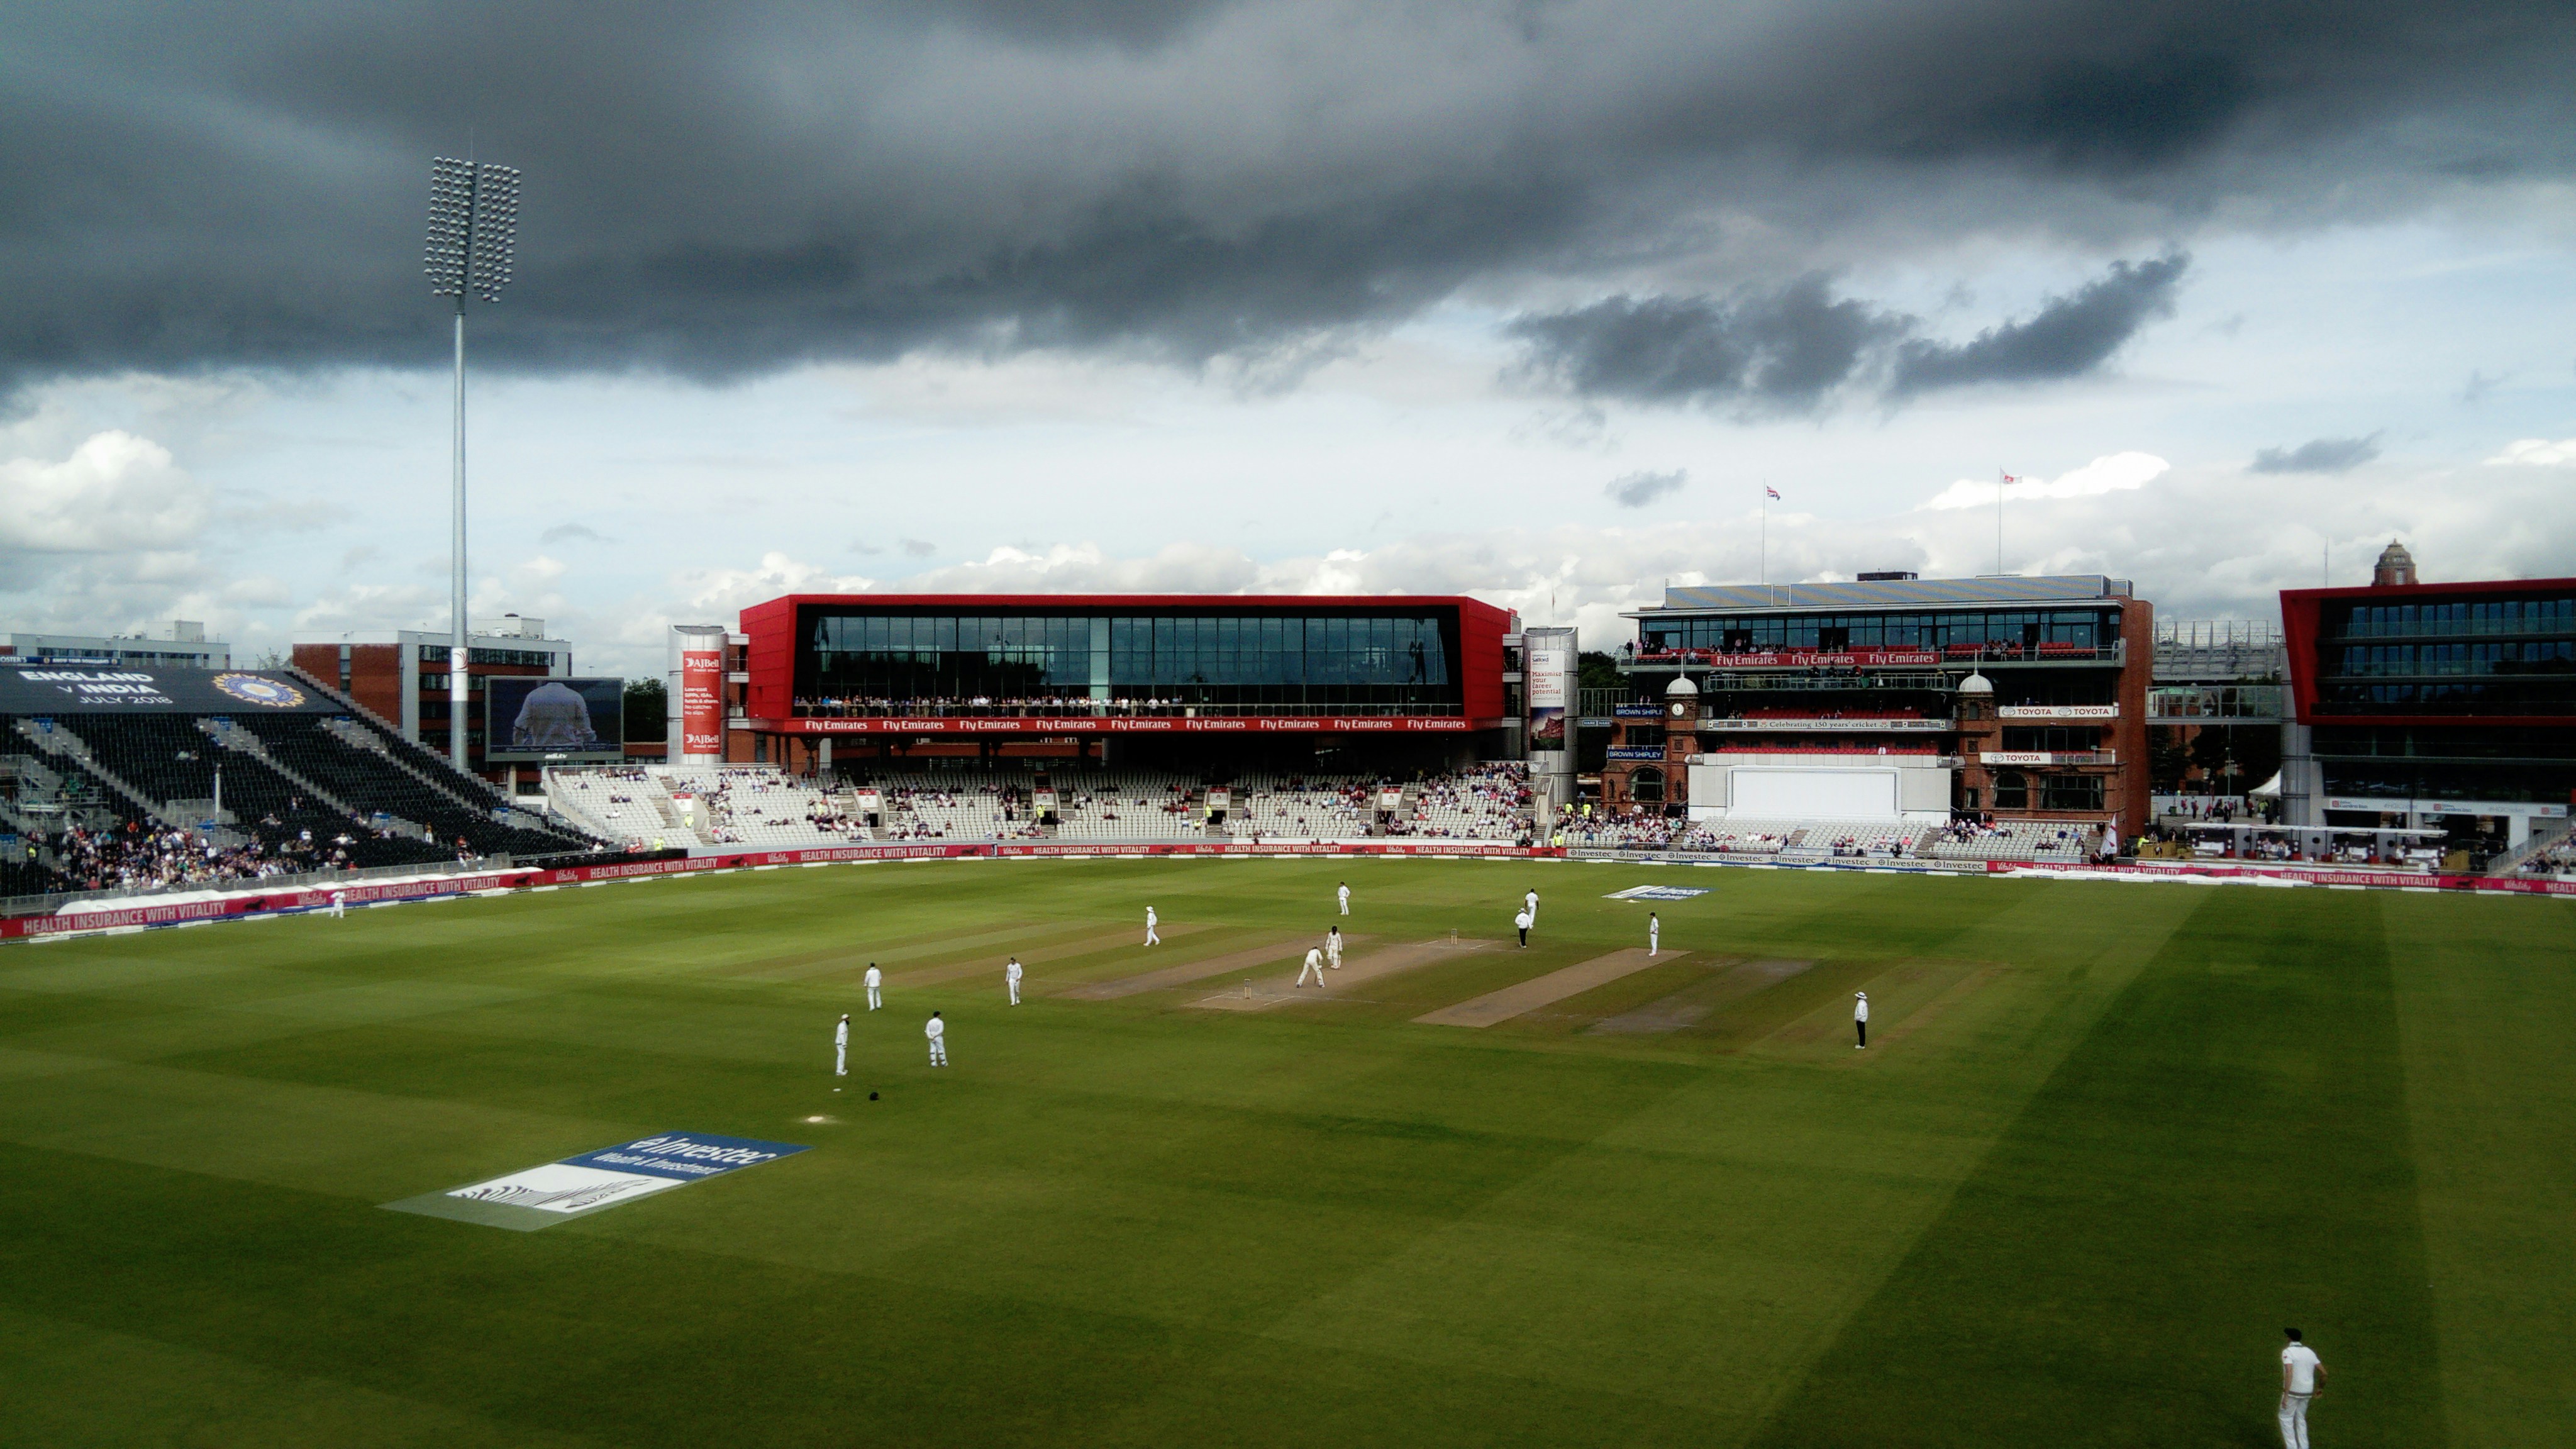 England playing South Africa at Old Trafford Cricket Ground. Photograph by Mark Stuckey.